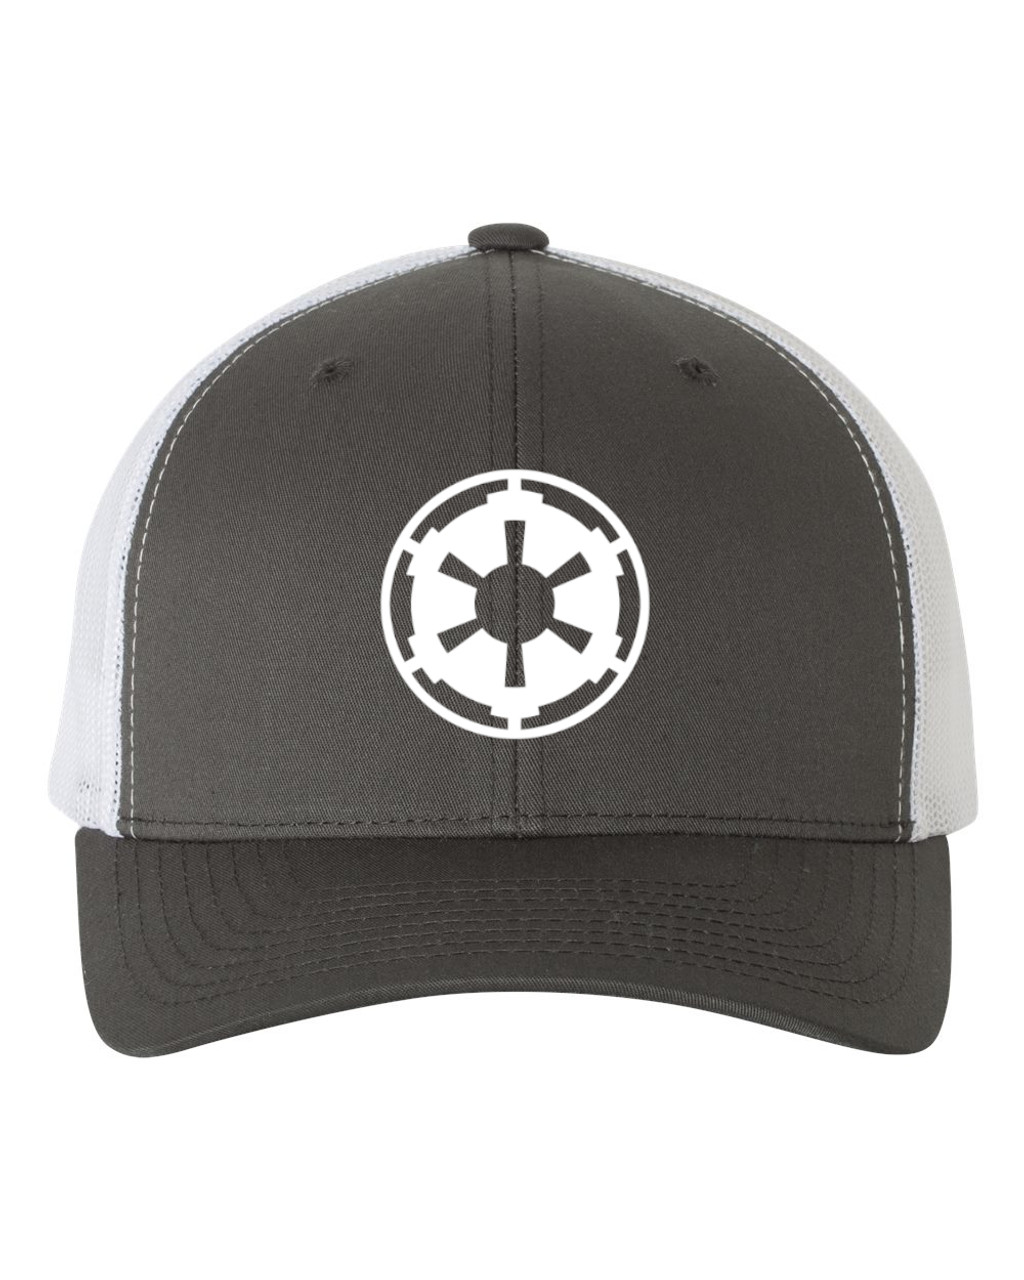 Star Force Imperial Cog Emblem Heat Pressed Grey on White Curved Bill Hat - Adult Mesh Trucker Snap Back Cap